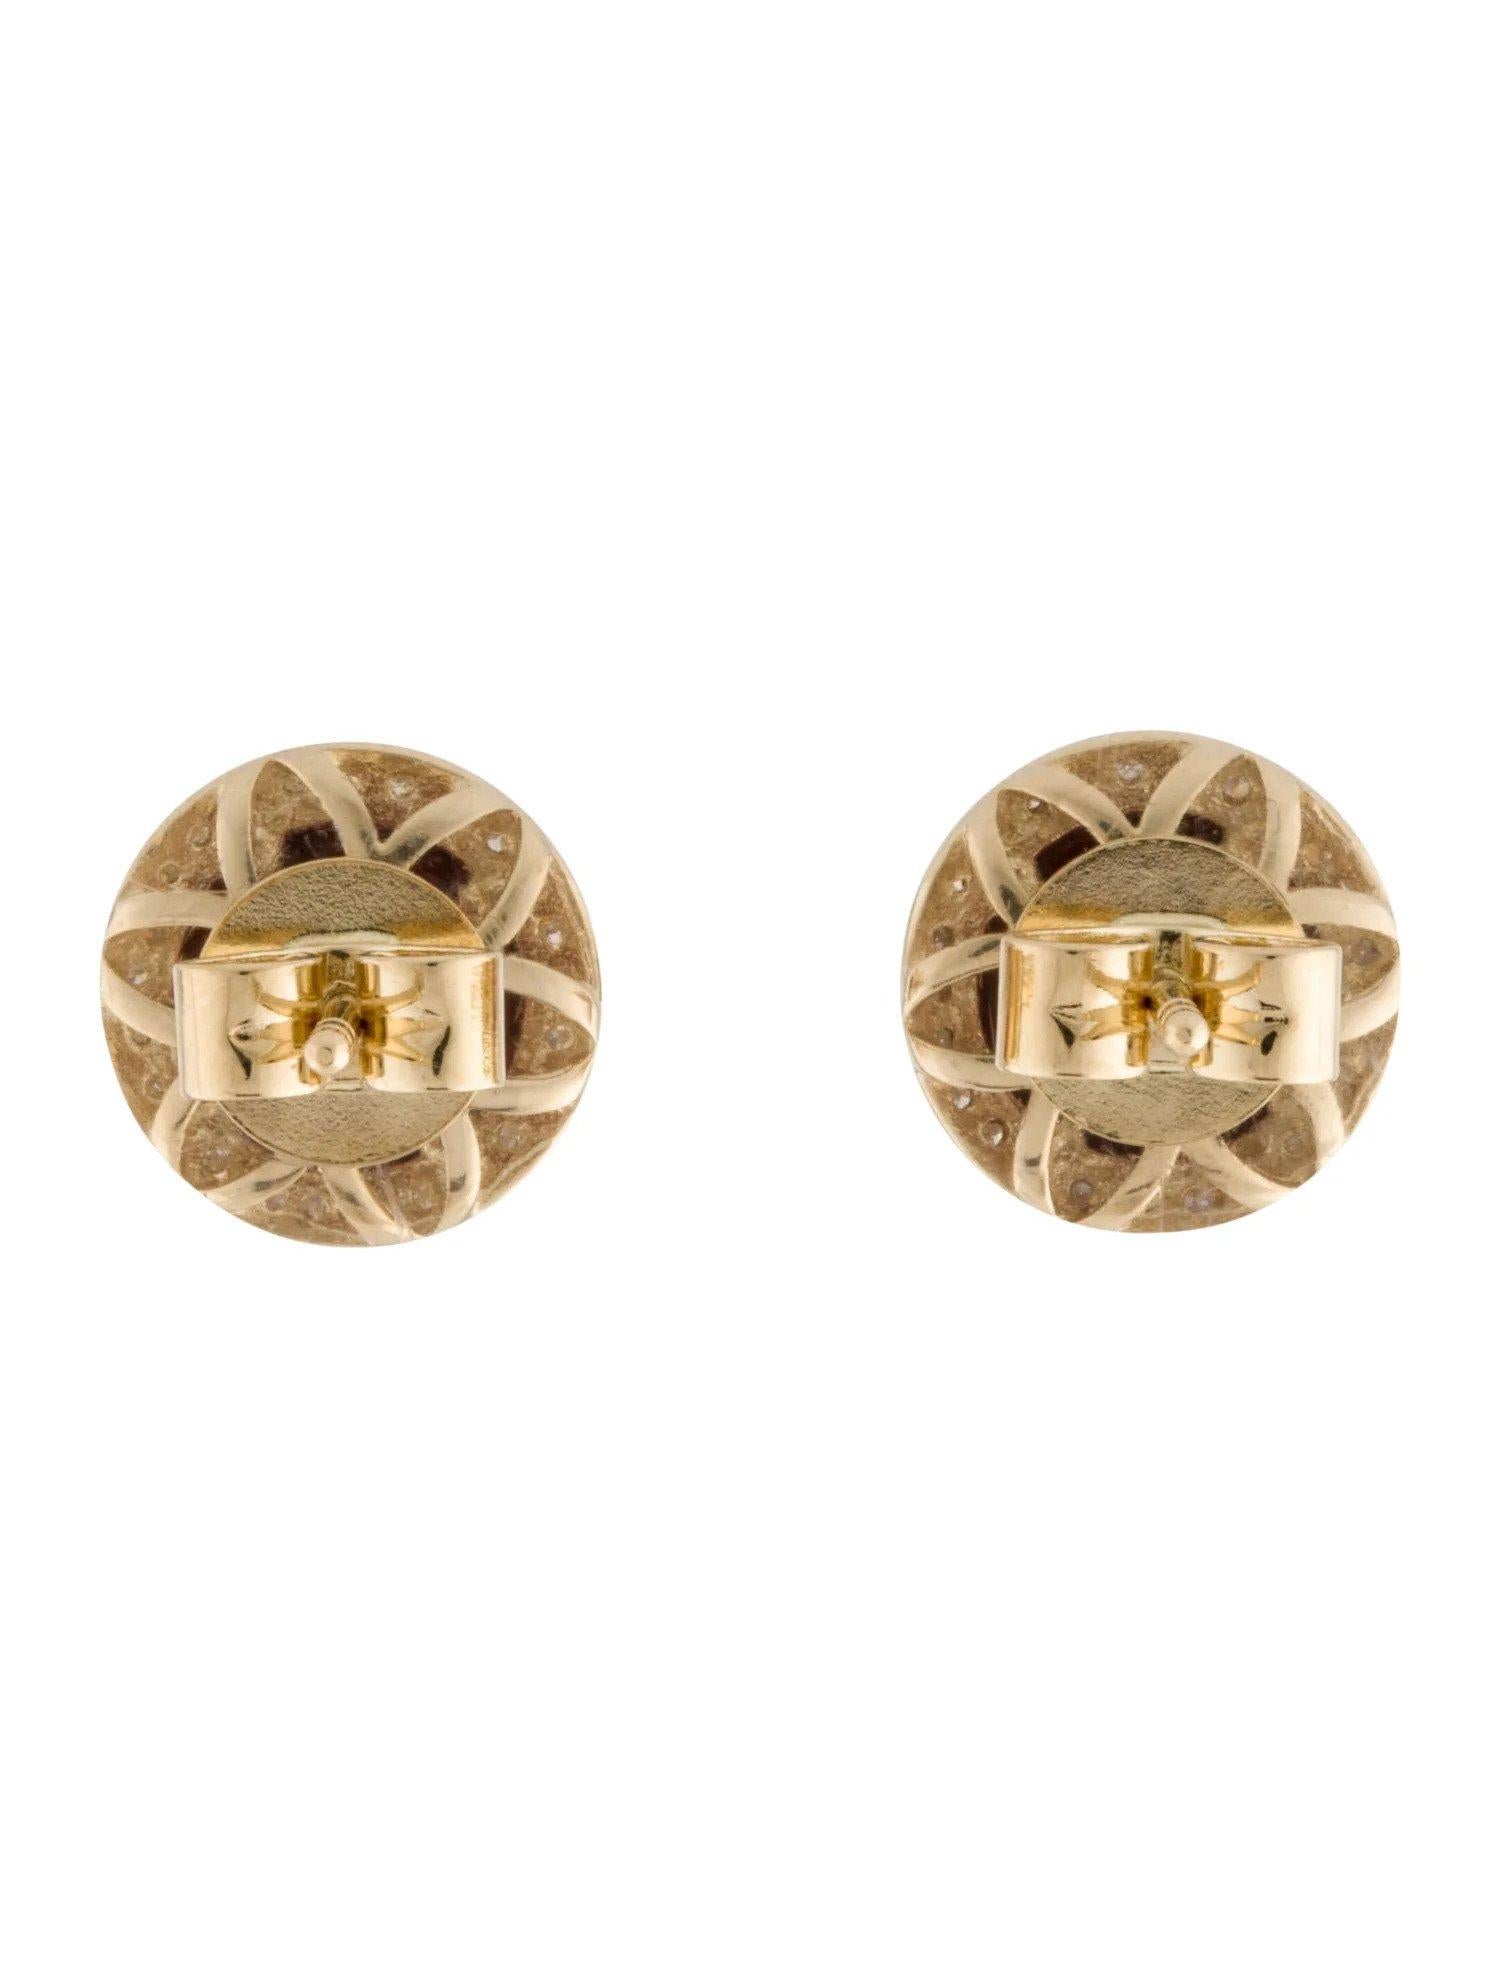 2.95 Carat Round Garnet & Diamond Yellow Gold Stud Earrings  In New Condition For Sale In Great Neck, NY